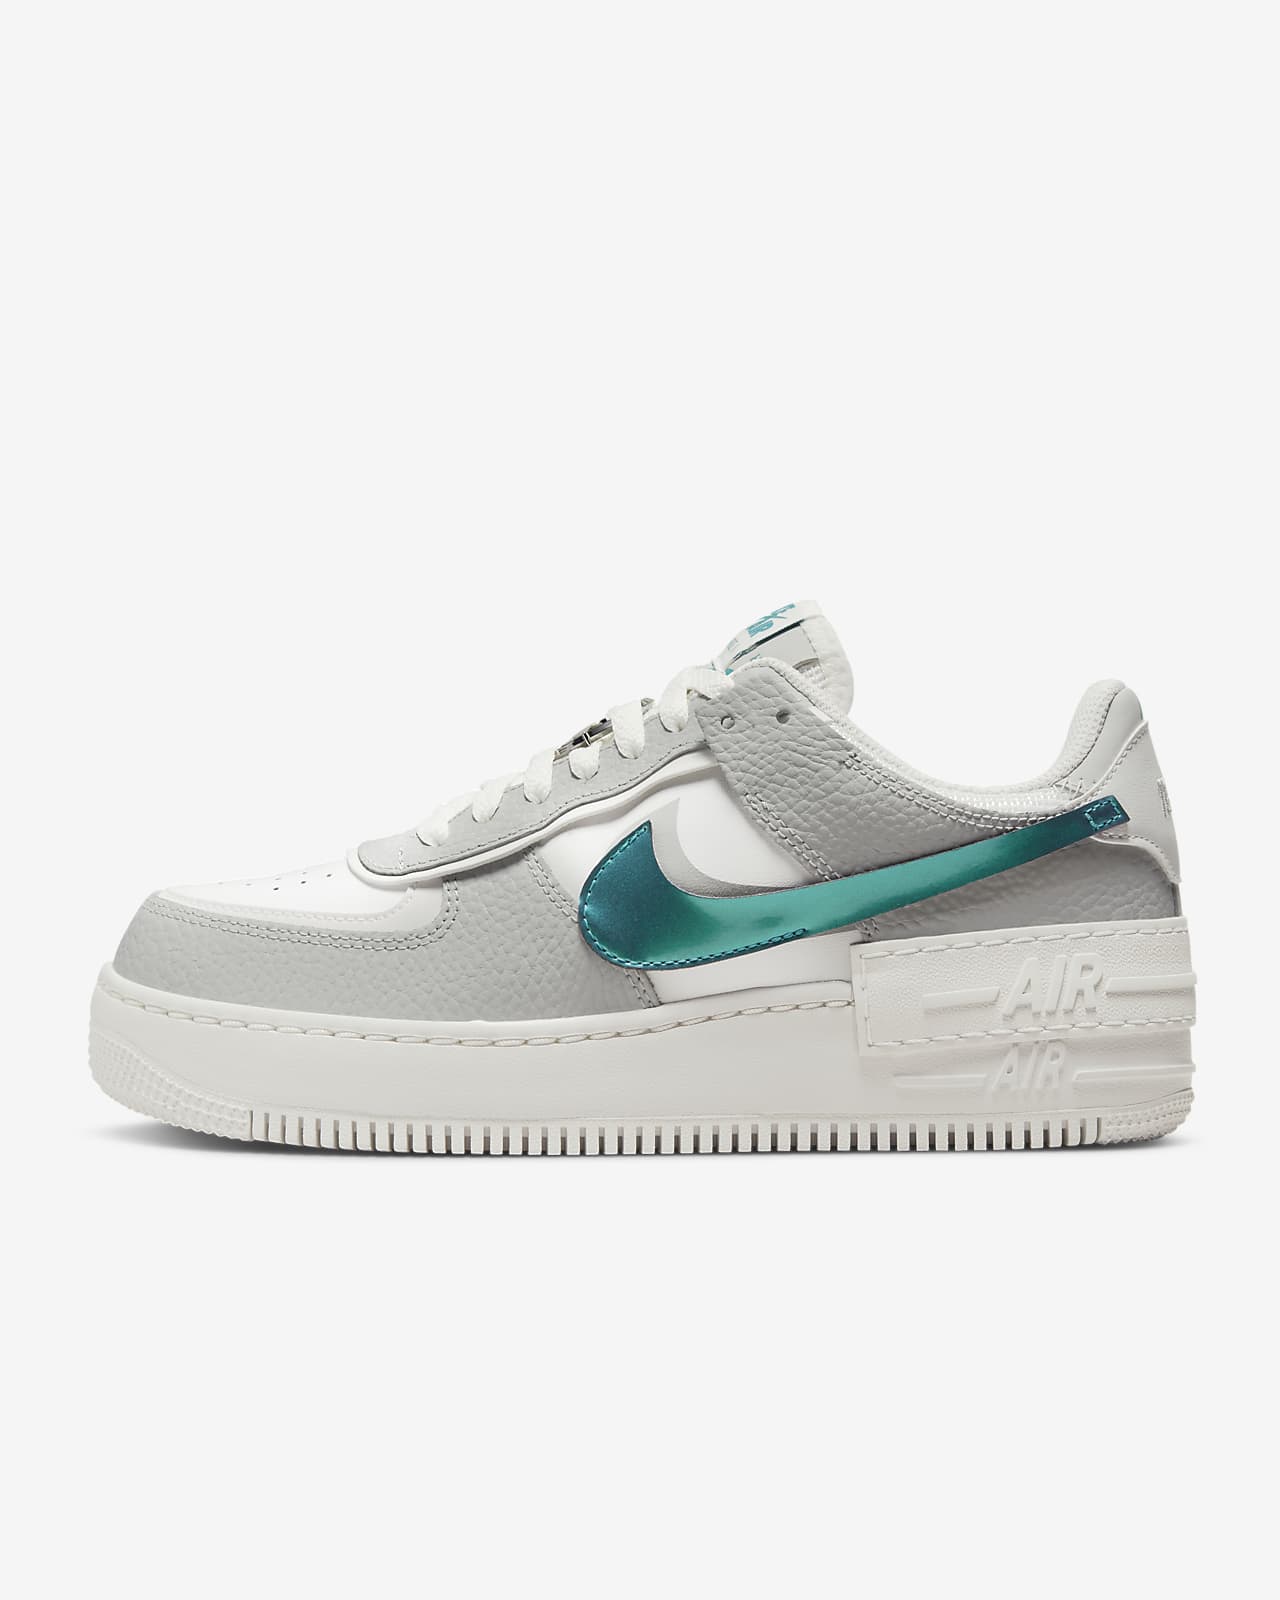 Indoors Southern equal Nike Air Force 1 Shadow Women's Shoes. Nike SA